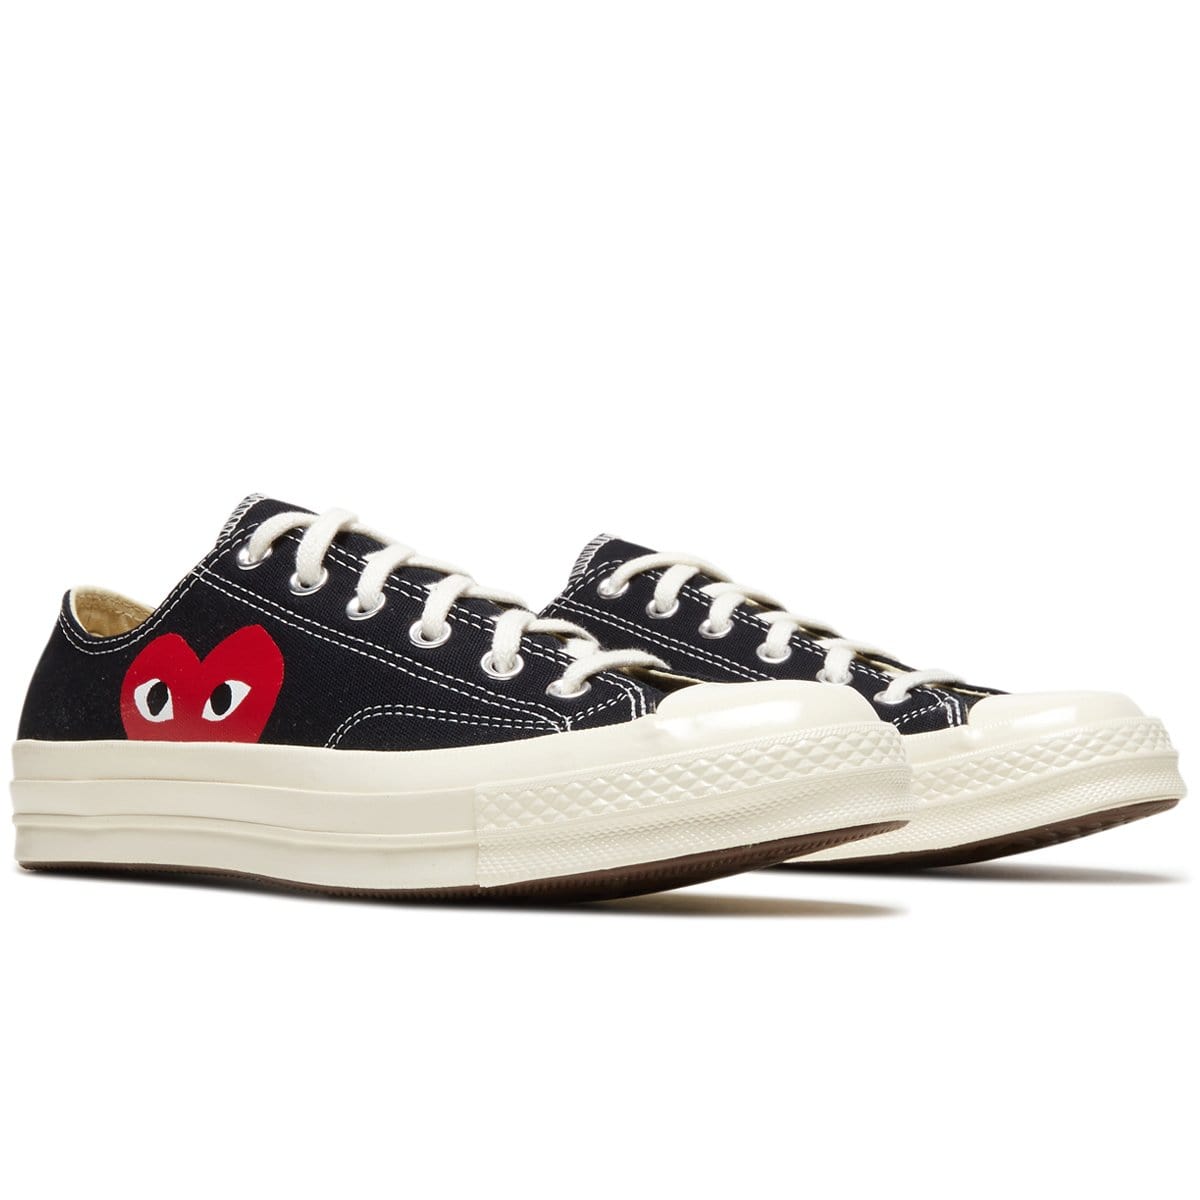 The Comme Des Garcons Play x Converse Sneakers That Are In Stores Now